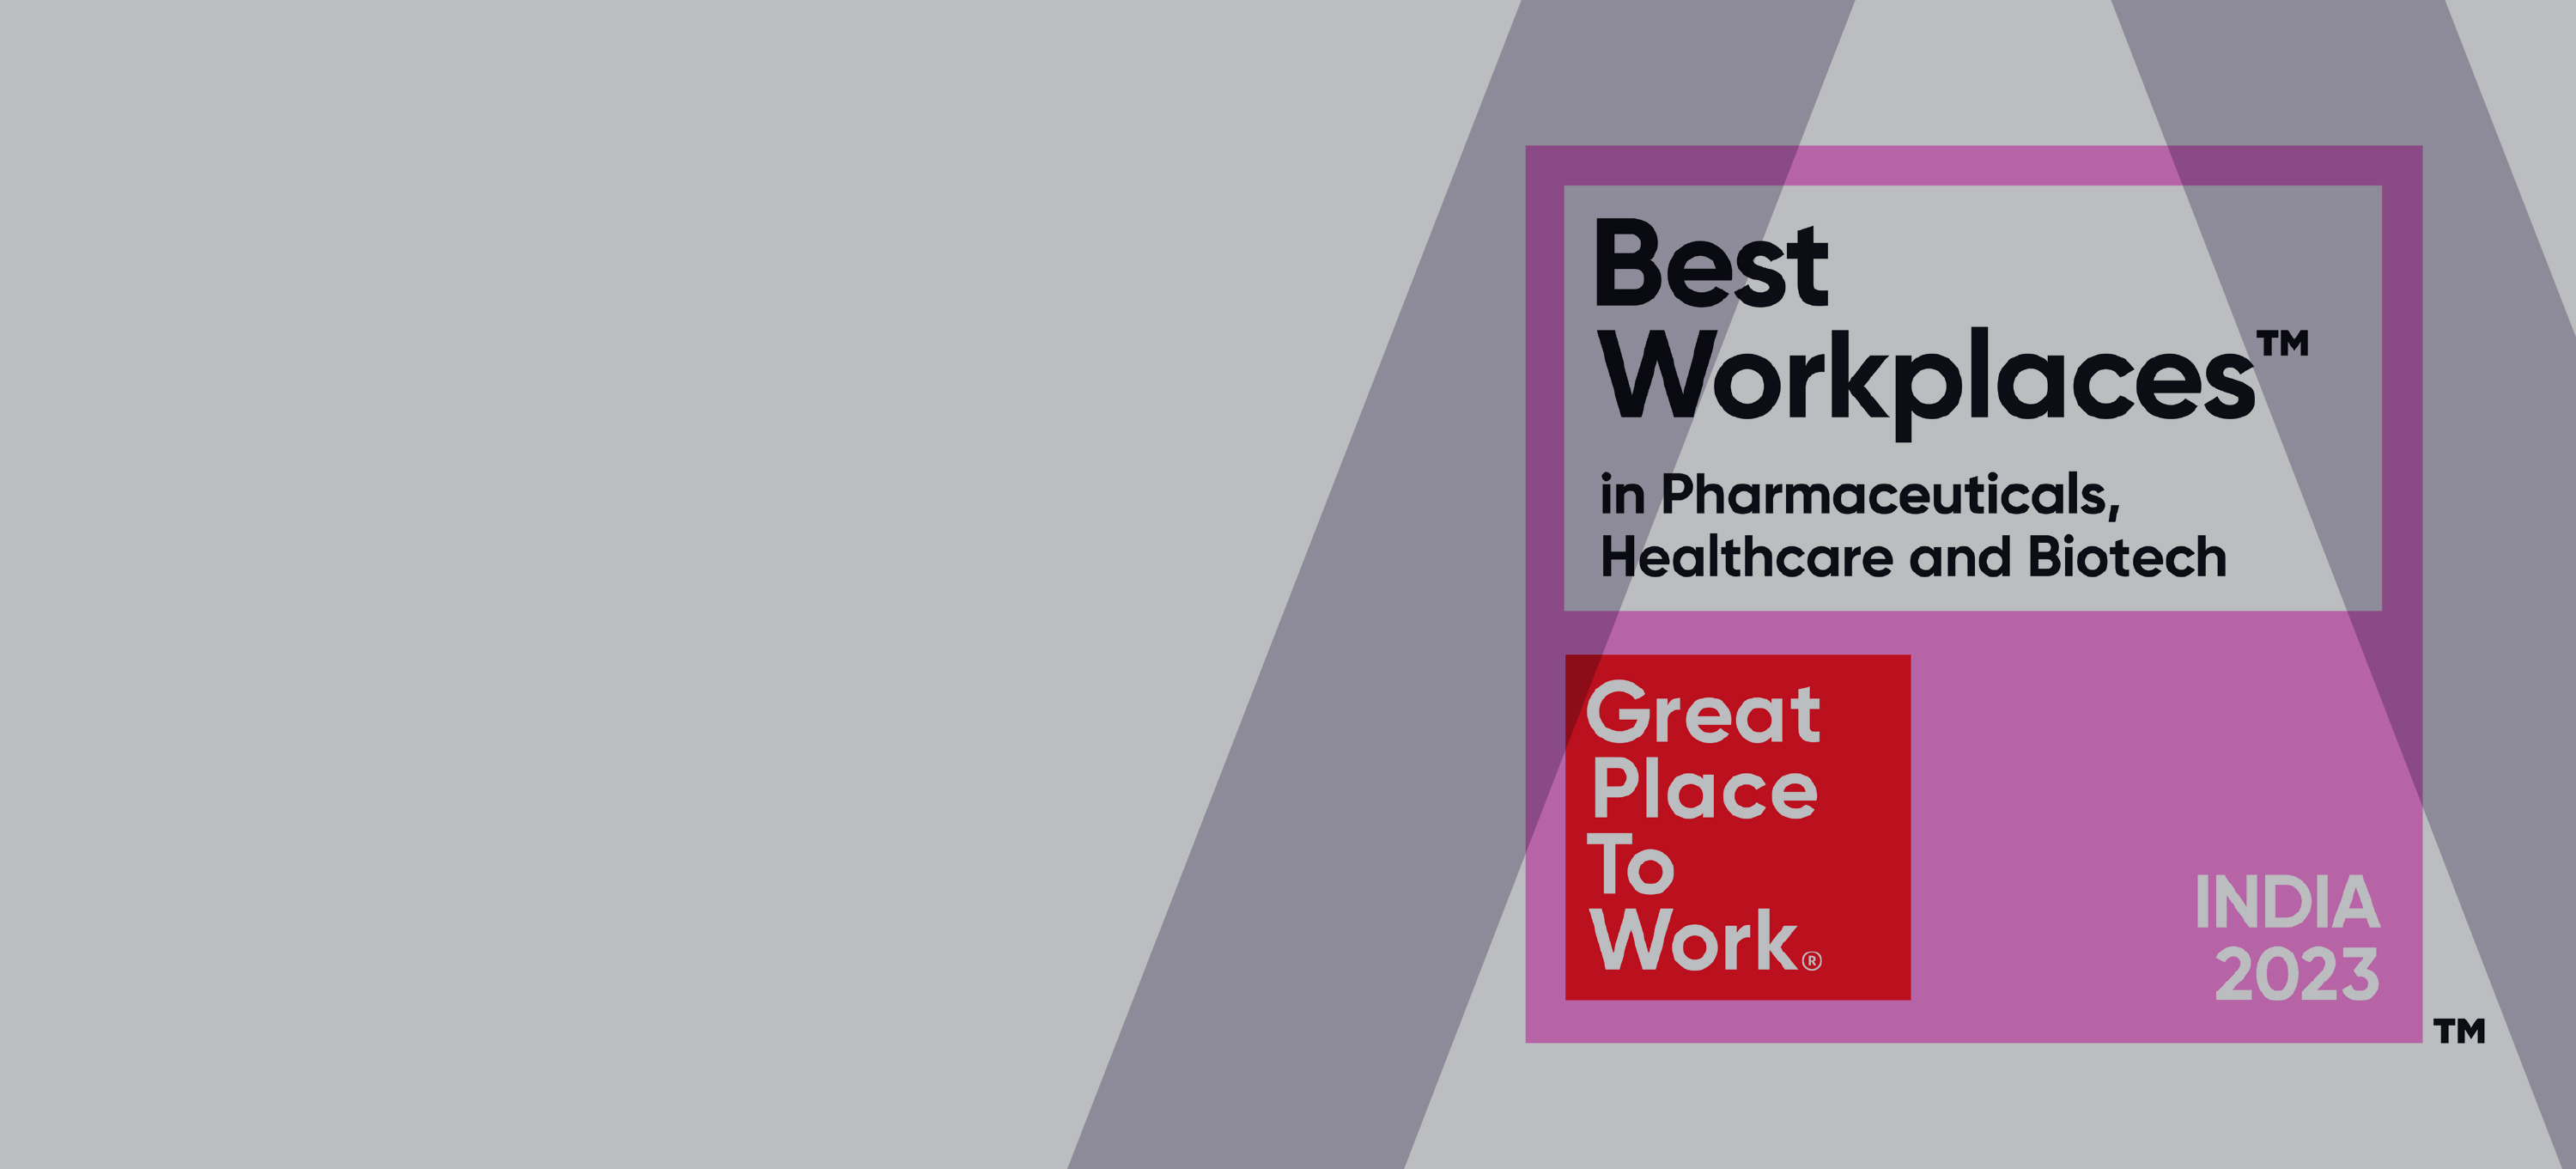 Allucent has been recognized as
			one of India’s Best Workplaces in Pharmaceuticals, Healthcare,	and Biotech 2023